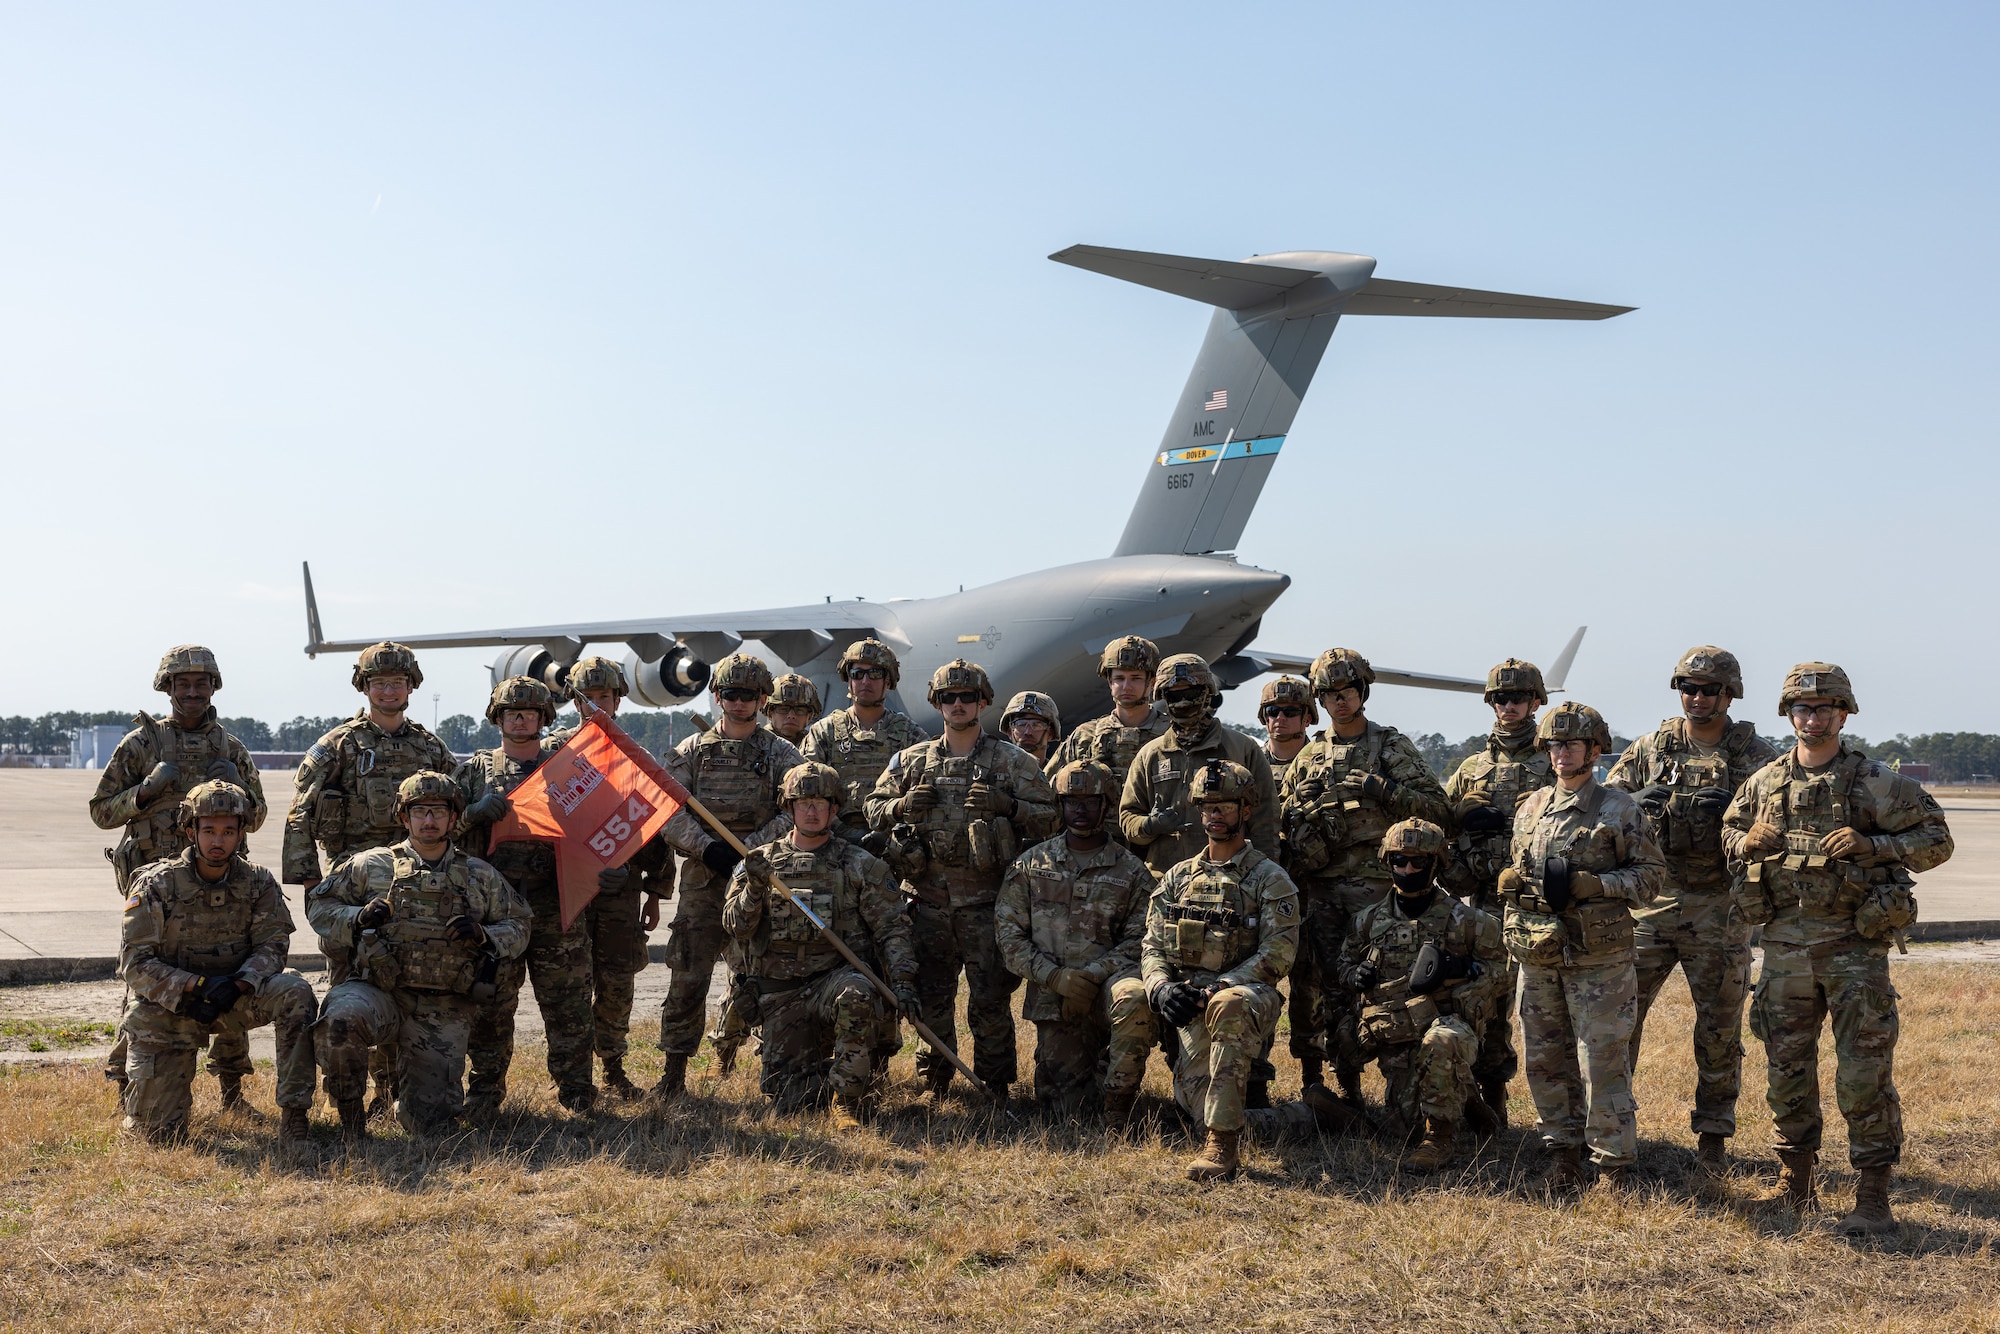 The 621st Contingency Response Group conducted Exercise Diavoli Vale to show interoperability with other forces as well as its self-sufficient capabilities, which allow it to open, operate and/or close any airfield around the globe.